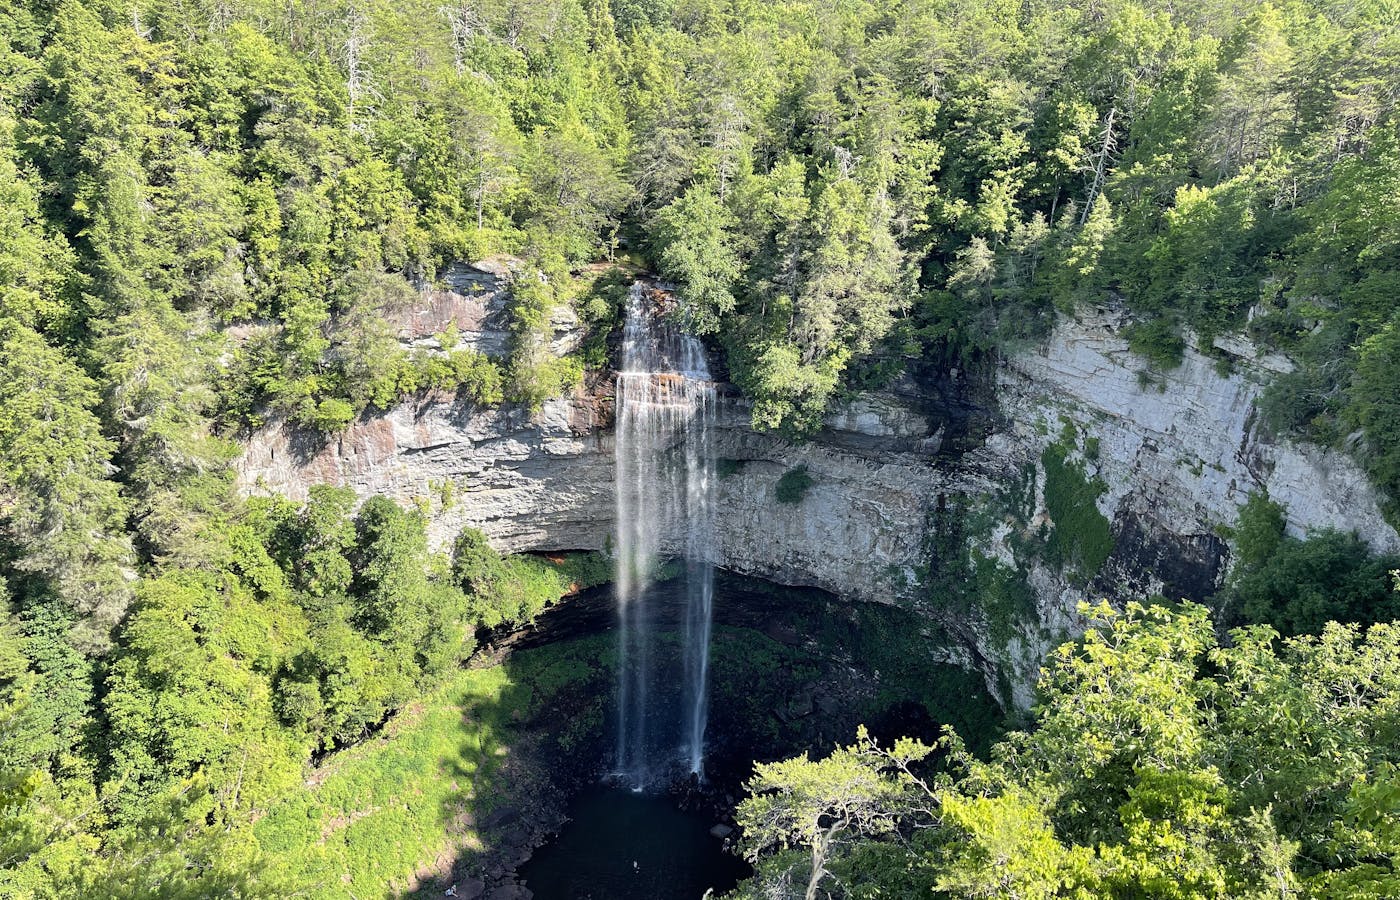 Cane Creek Falls at Fall Creek Falls State Park in Spencer, Tennessee (photo courtesy of Tennessee State Parks)